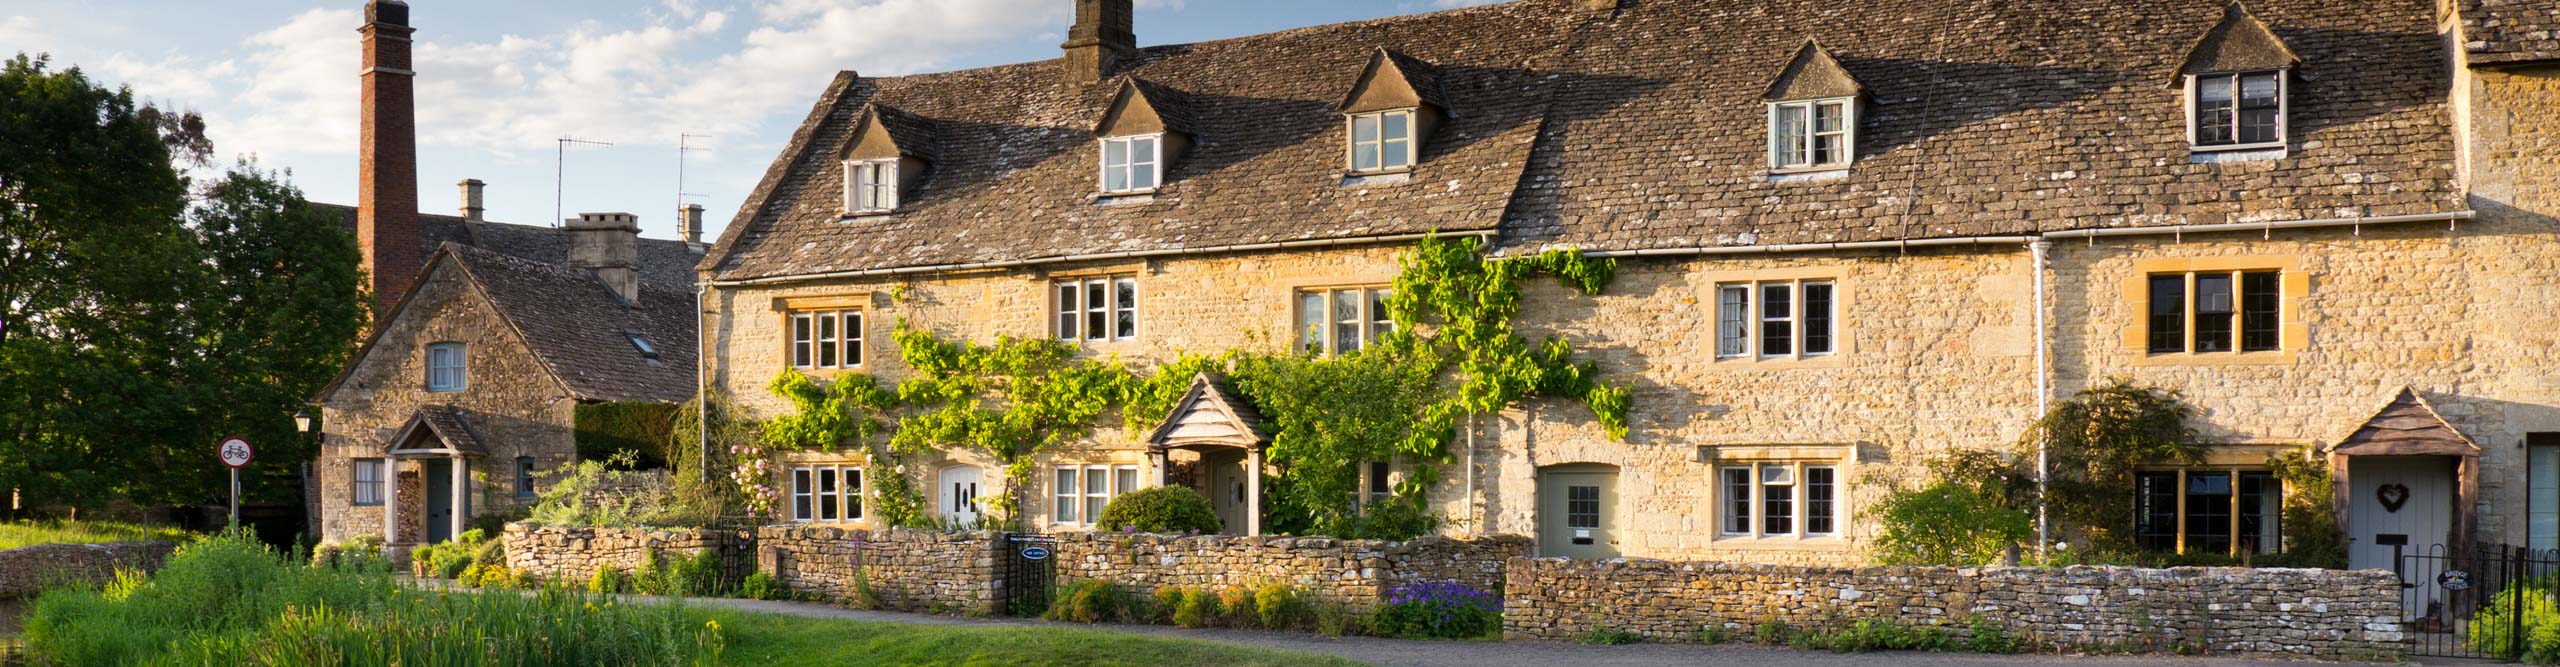 Cottages in the village of Lower Slaughter, in the Cotswolds, in the late afternoon sun, England